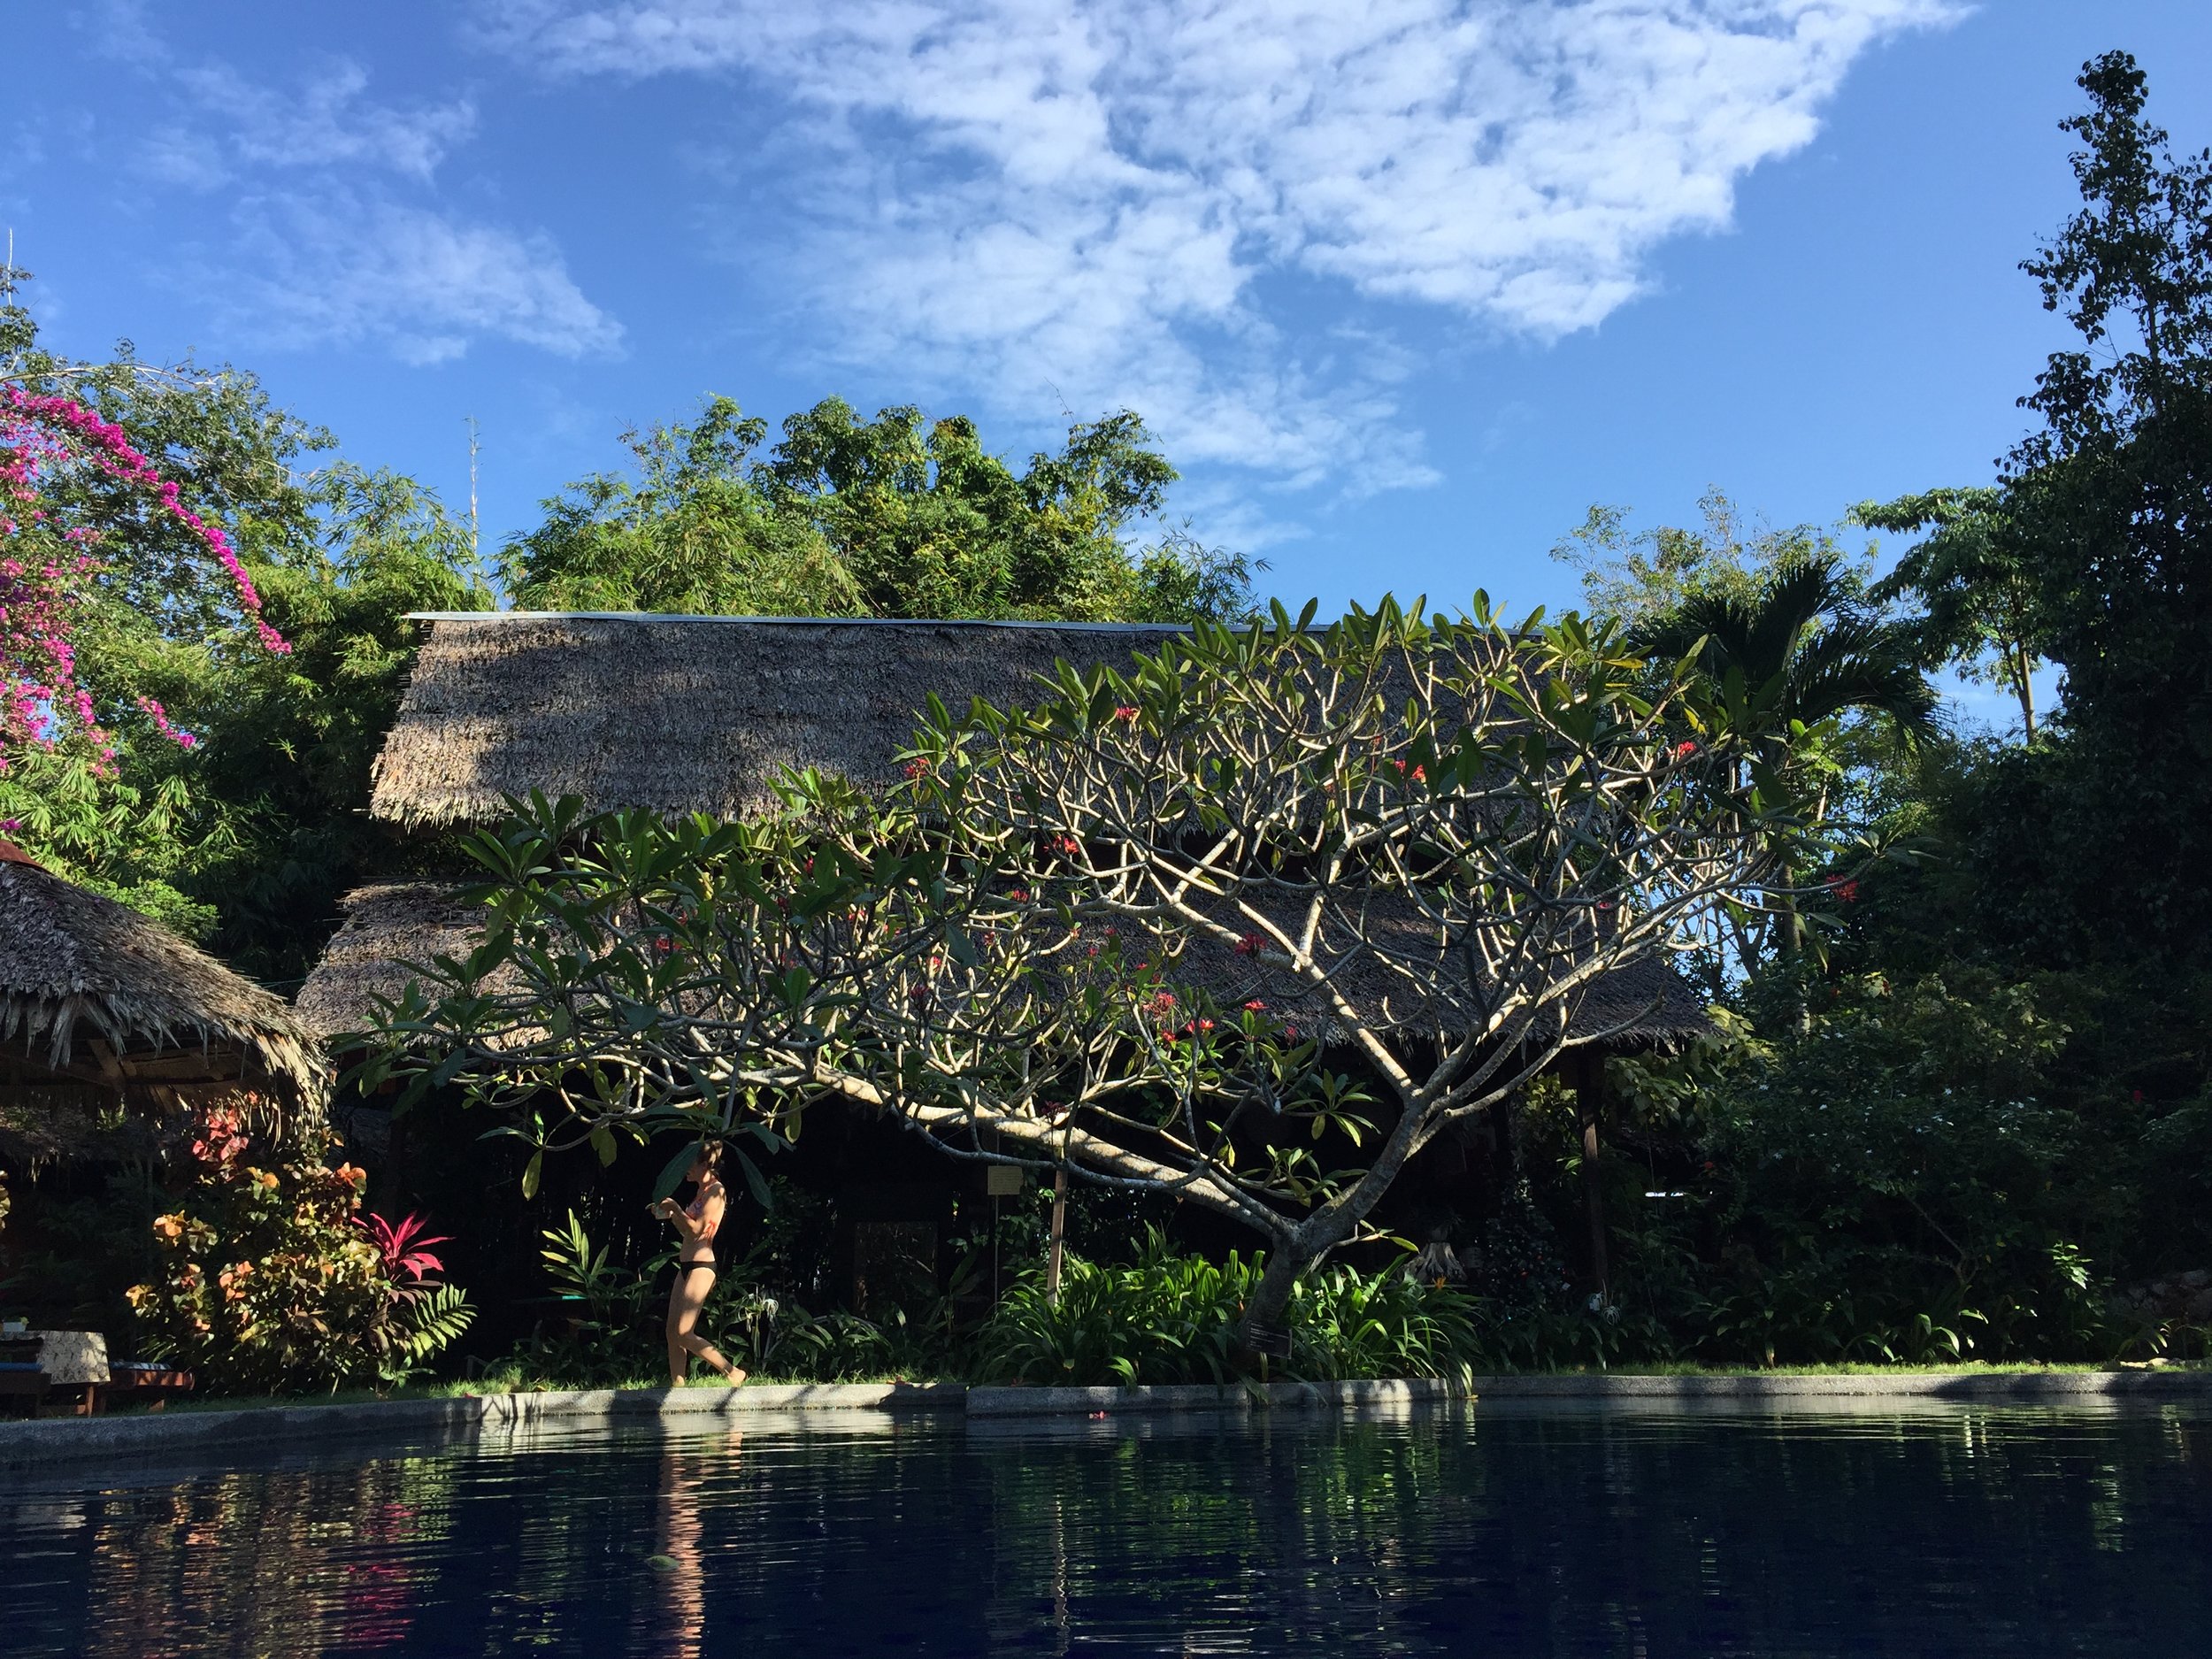 Blue sky means relaxing poolside at Tiger Rock